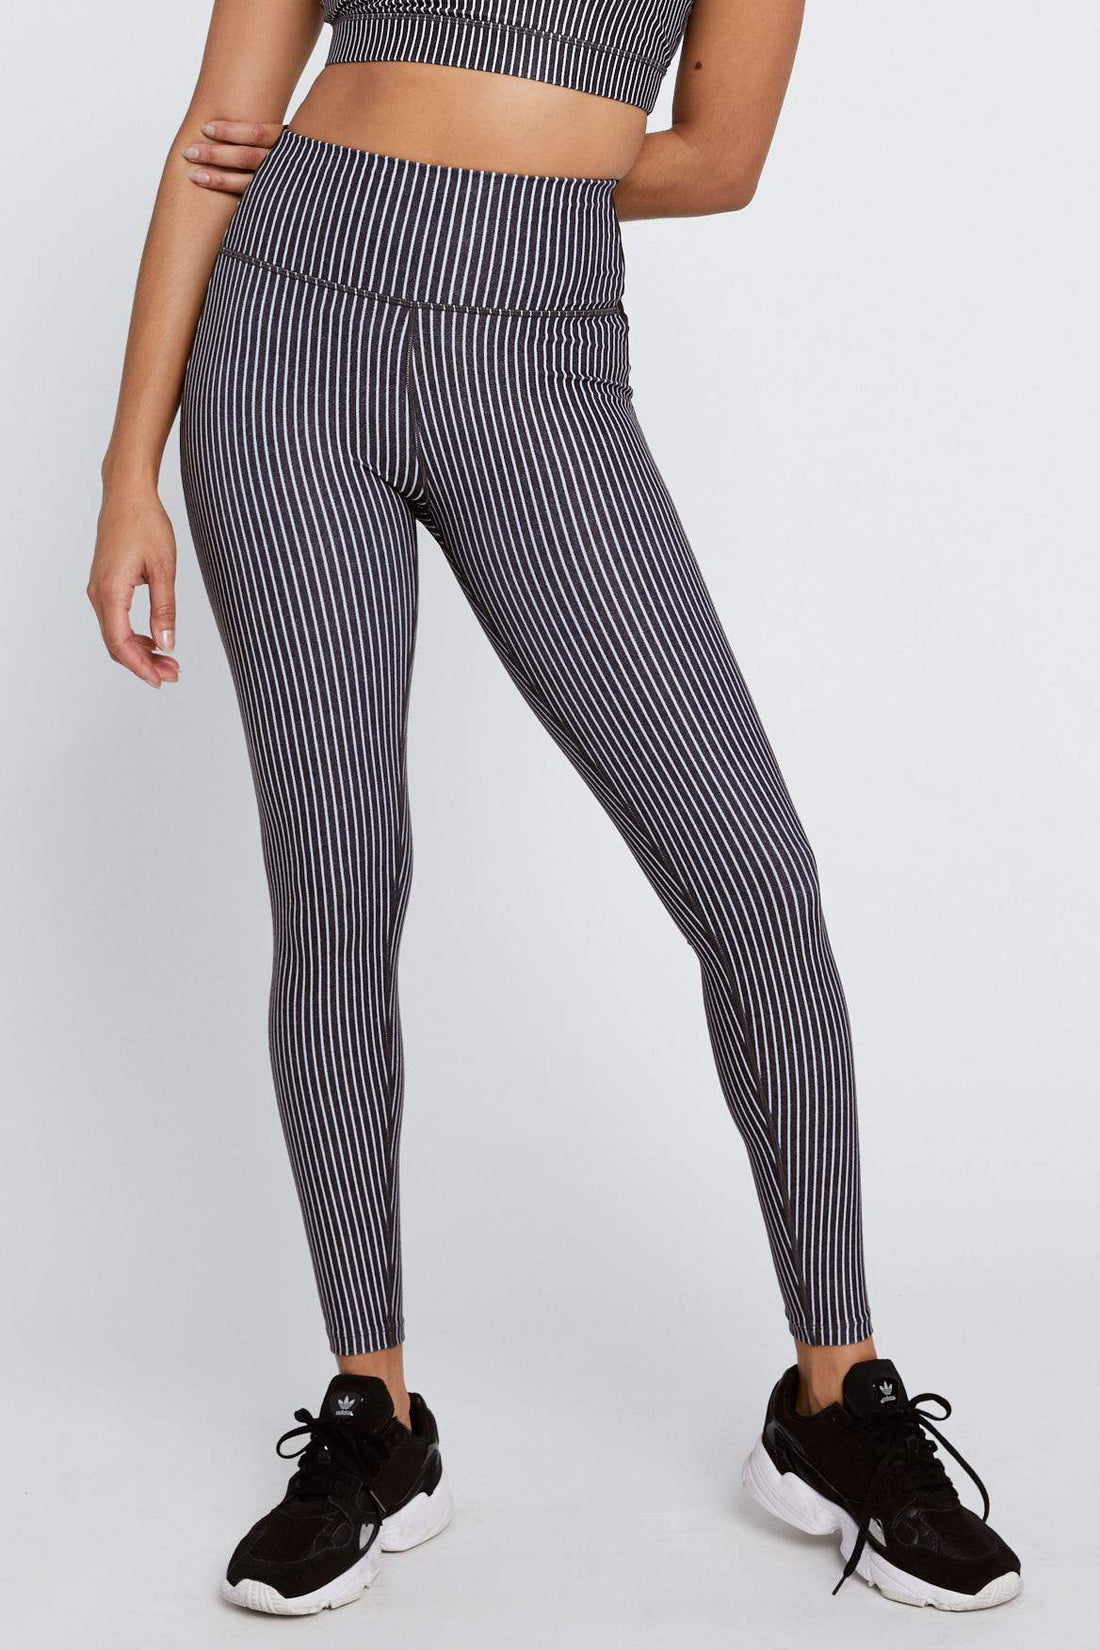 Black and White Vertical Striped Tights - Inspire Uplift